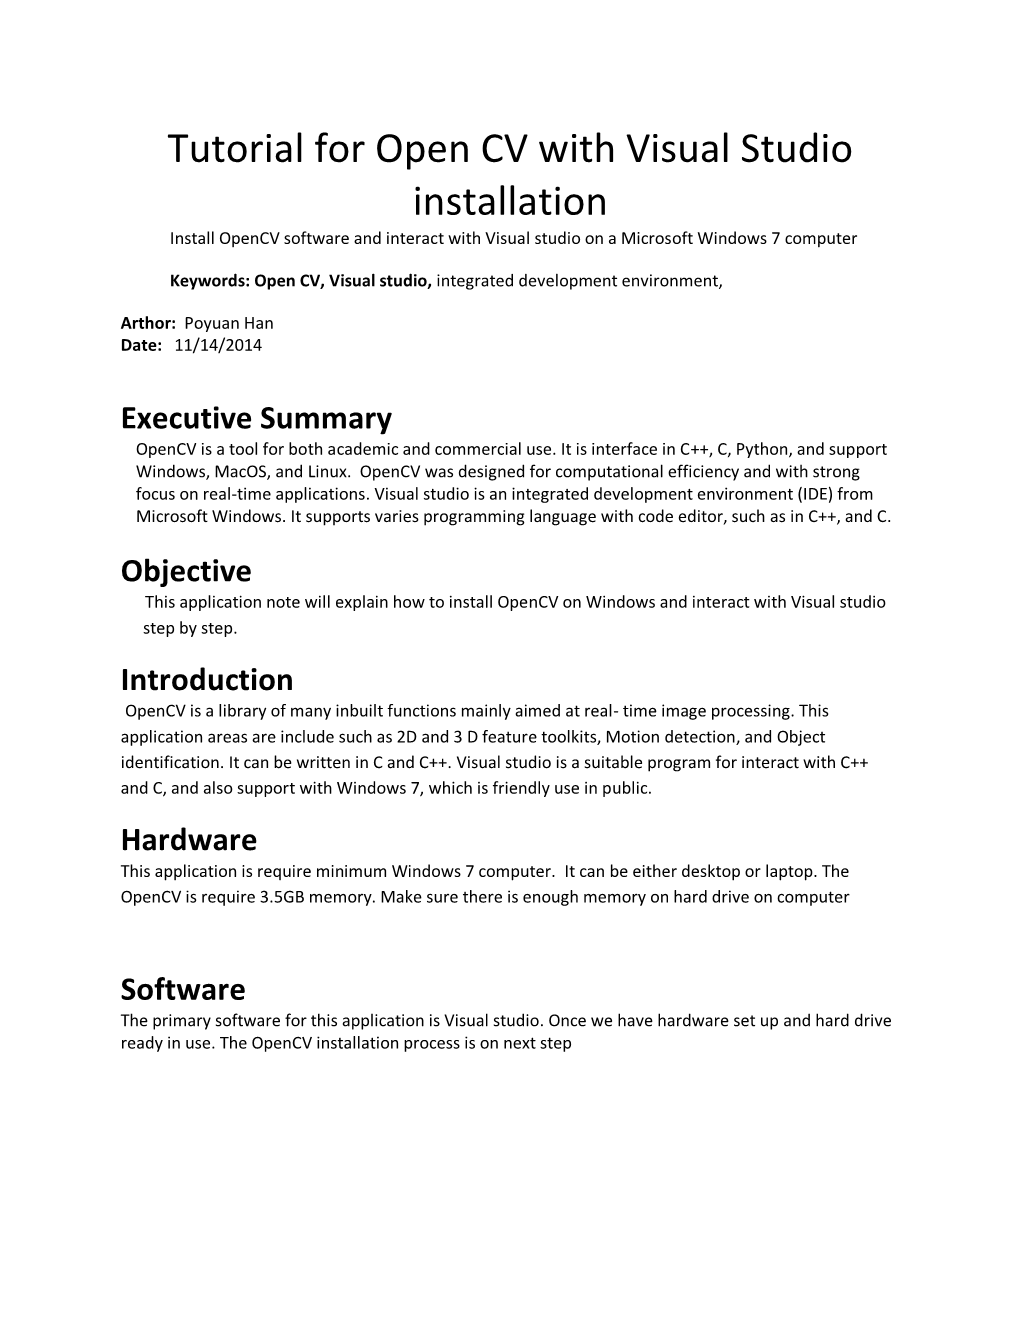 Tutorial for Open CV with Visual Studio Installation Install Opencv Software and Interact with Visual Studio on a Microsoft Windows 7 Computer